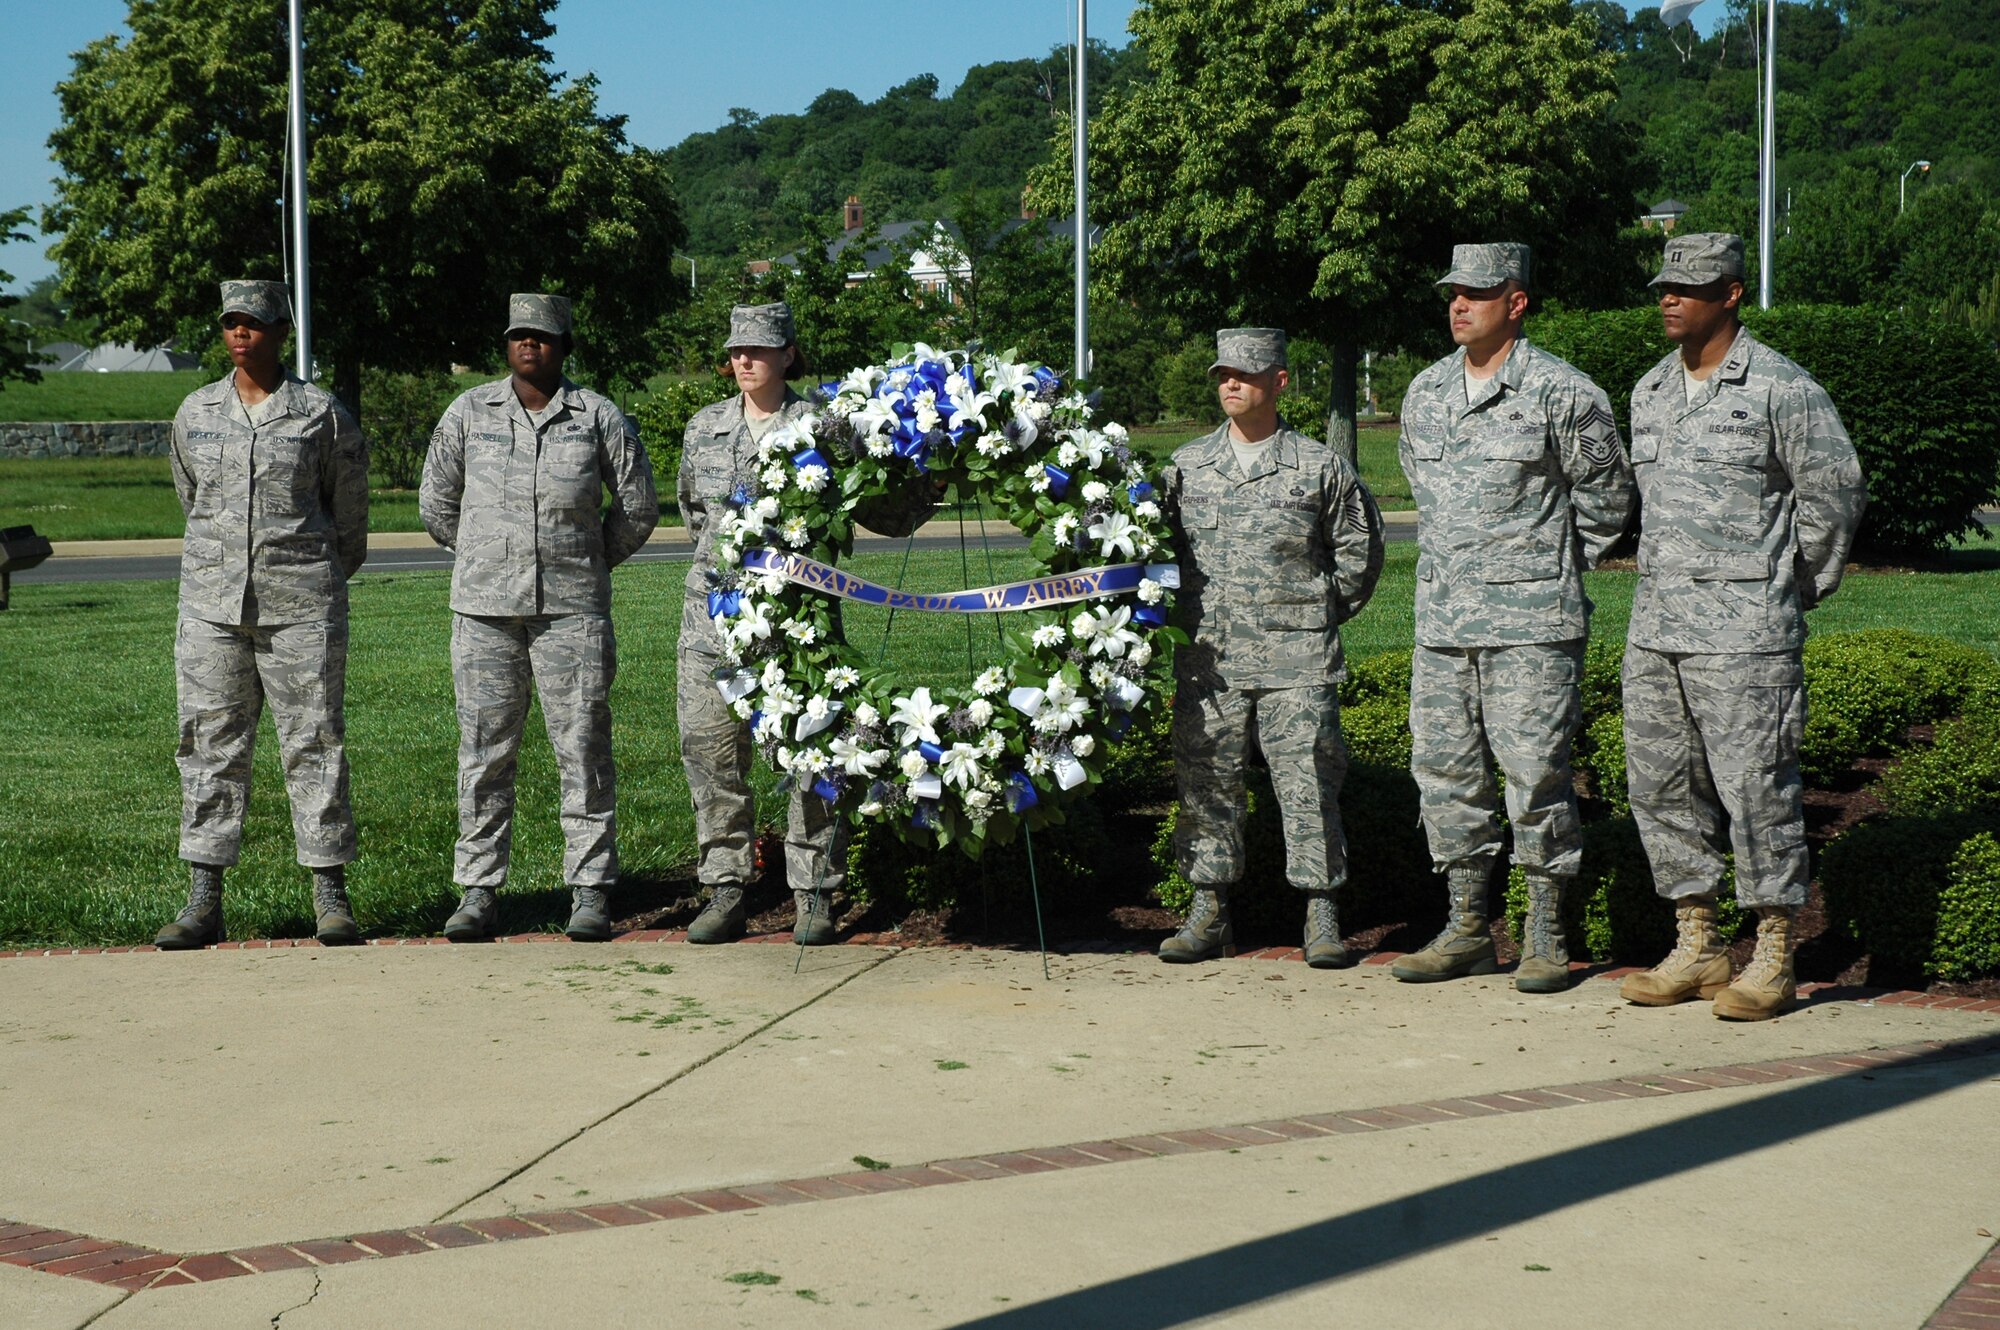 Bolling Airmen prepare to lay a wreath in honor of former Chief Master Sgt. of the Air Force Paul W. Airey during a retreat ceremony May 20, 2009 on Bolling Air Force Base. The retreat ceremony was held in honor of Chief Airey, to allow individuals unable to attend his funeral at Arlington National Cemetery on May 28 a chance to pay their respects. (U.S. Air Force photo by Airman 1st Class Katherine Windish)